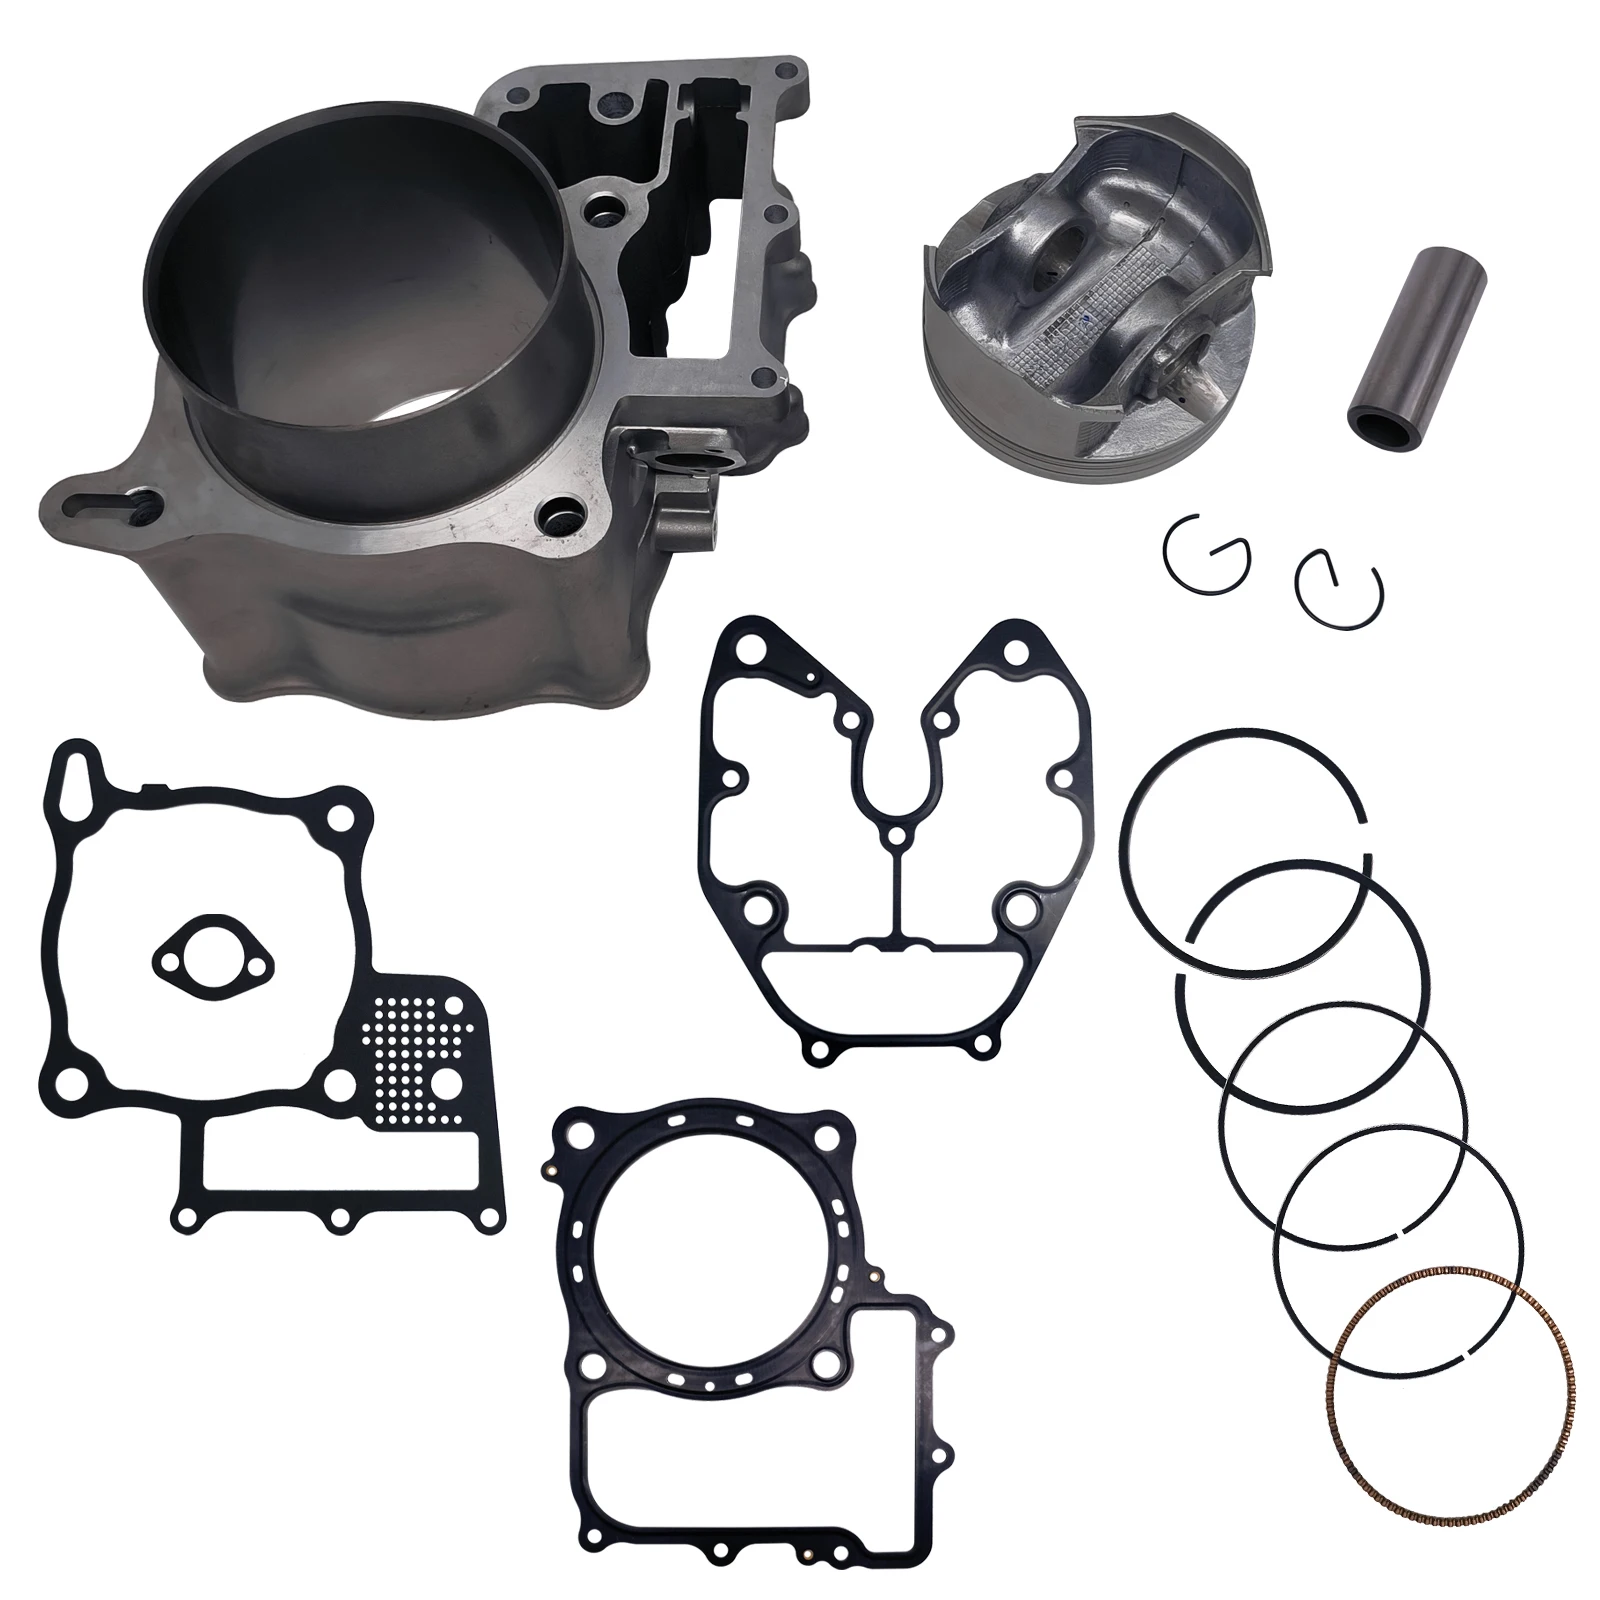 102MM Top End Rebuild Cylinder Kit For Honda TRX680 FA FGA Fourtrax Rincon 680 Big Red 700 MUV700 Pioneer 700 Deluxe SXS700 ATV